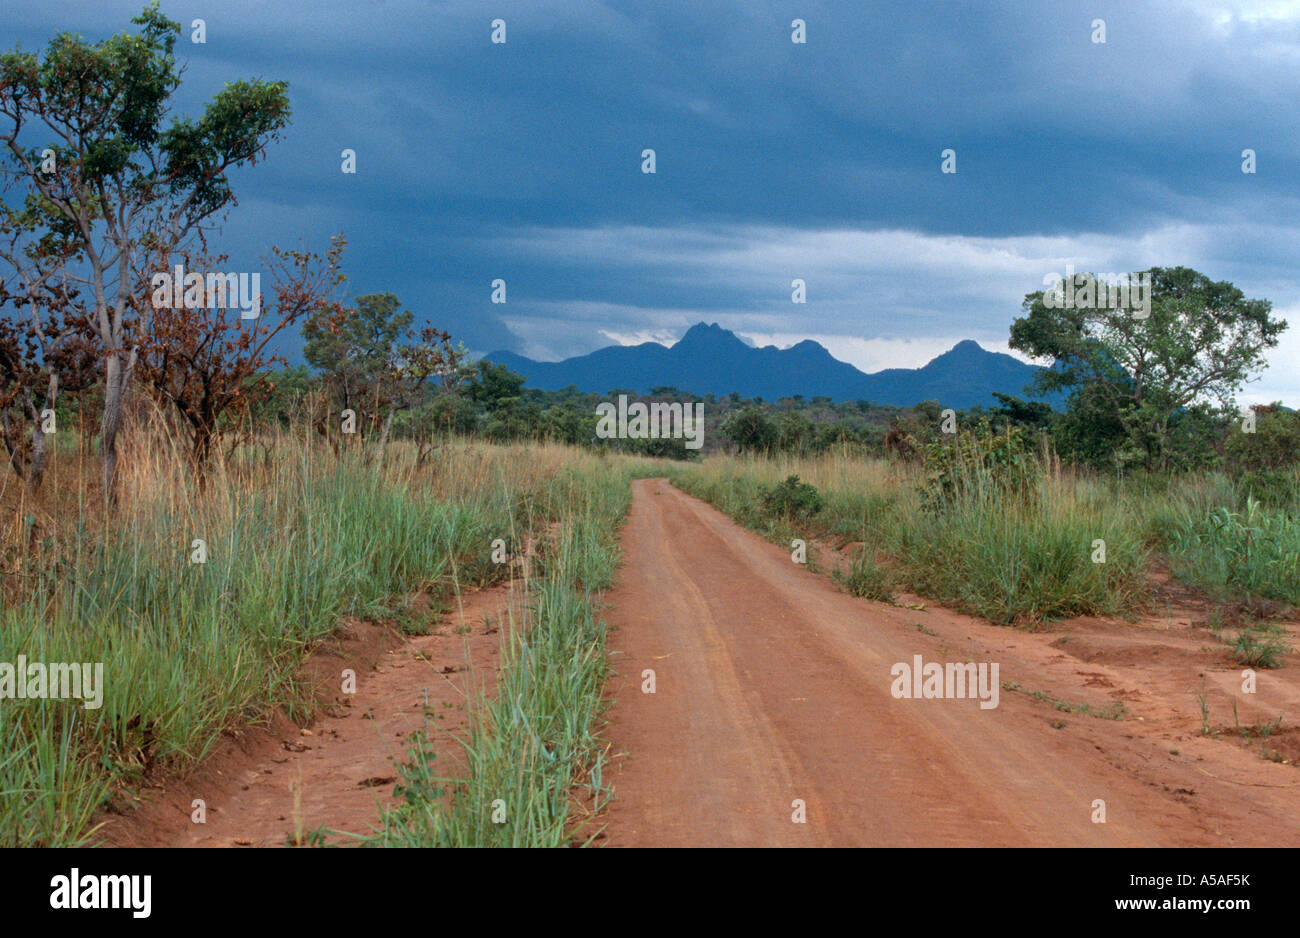 A view of the countryside in Northern Uganda Stock Photo